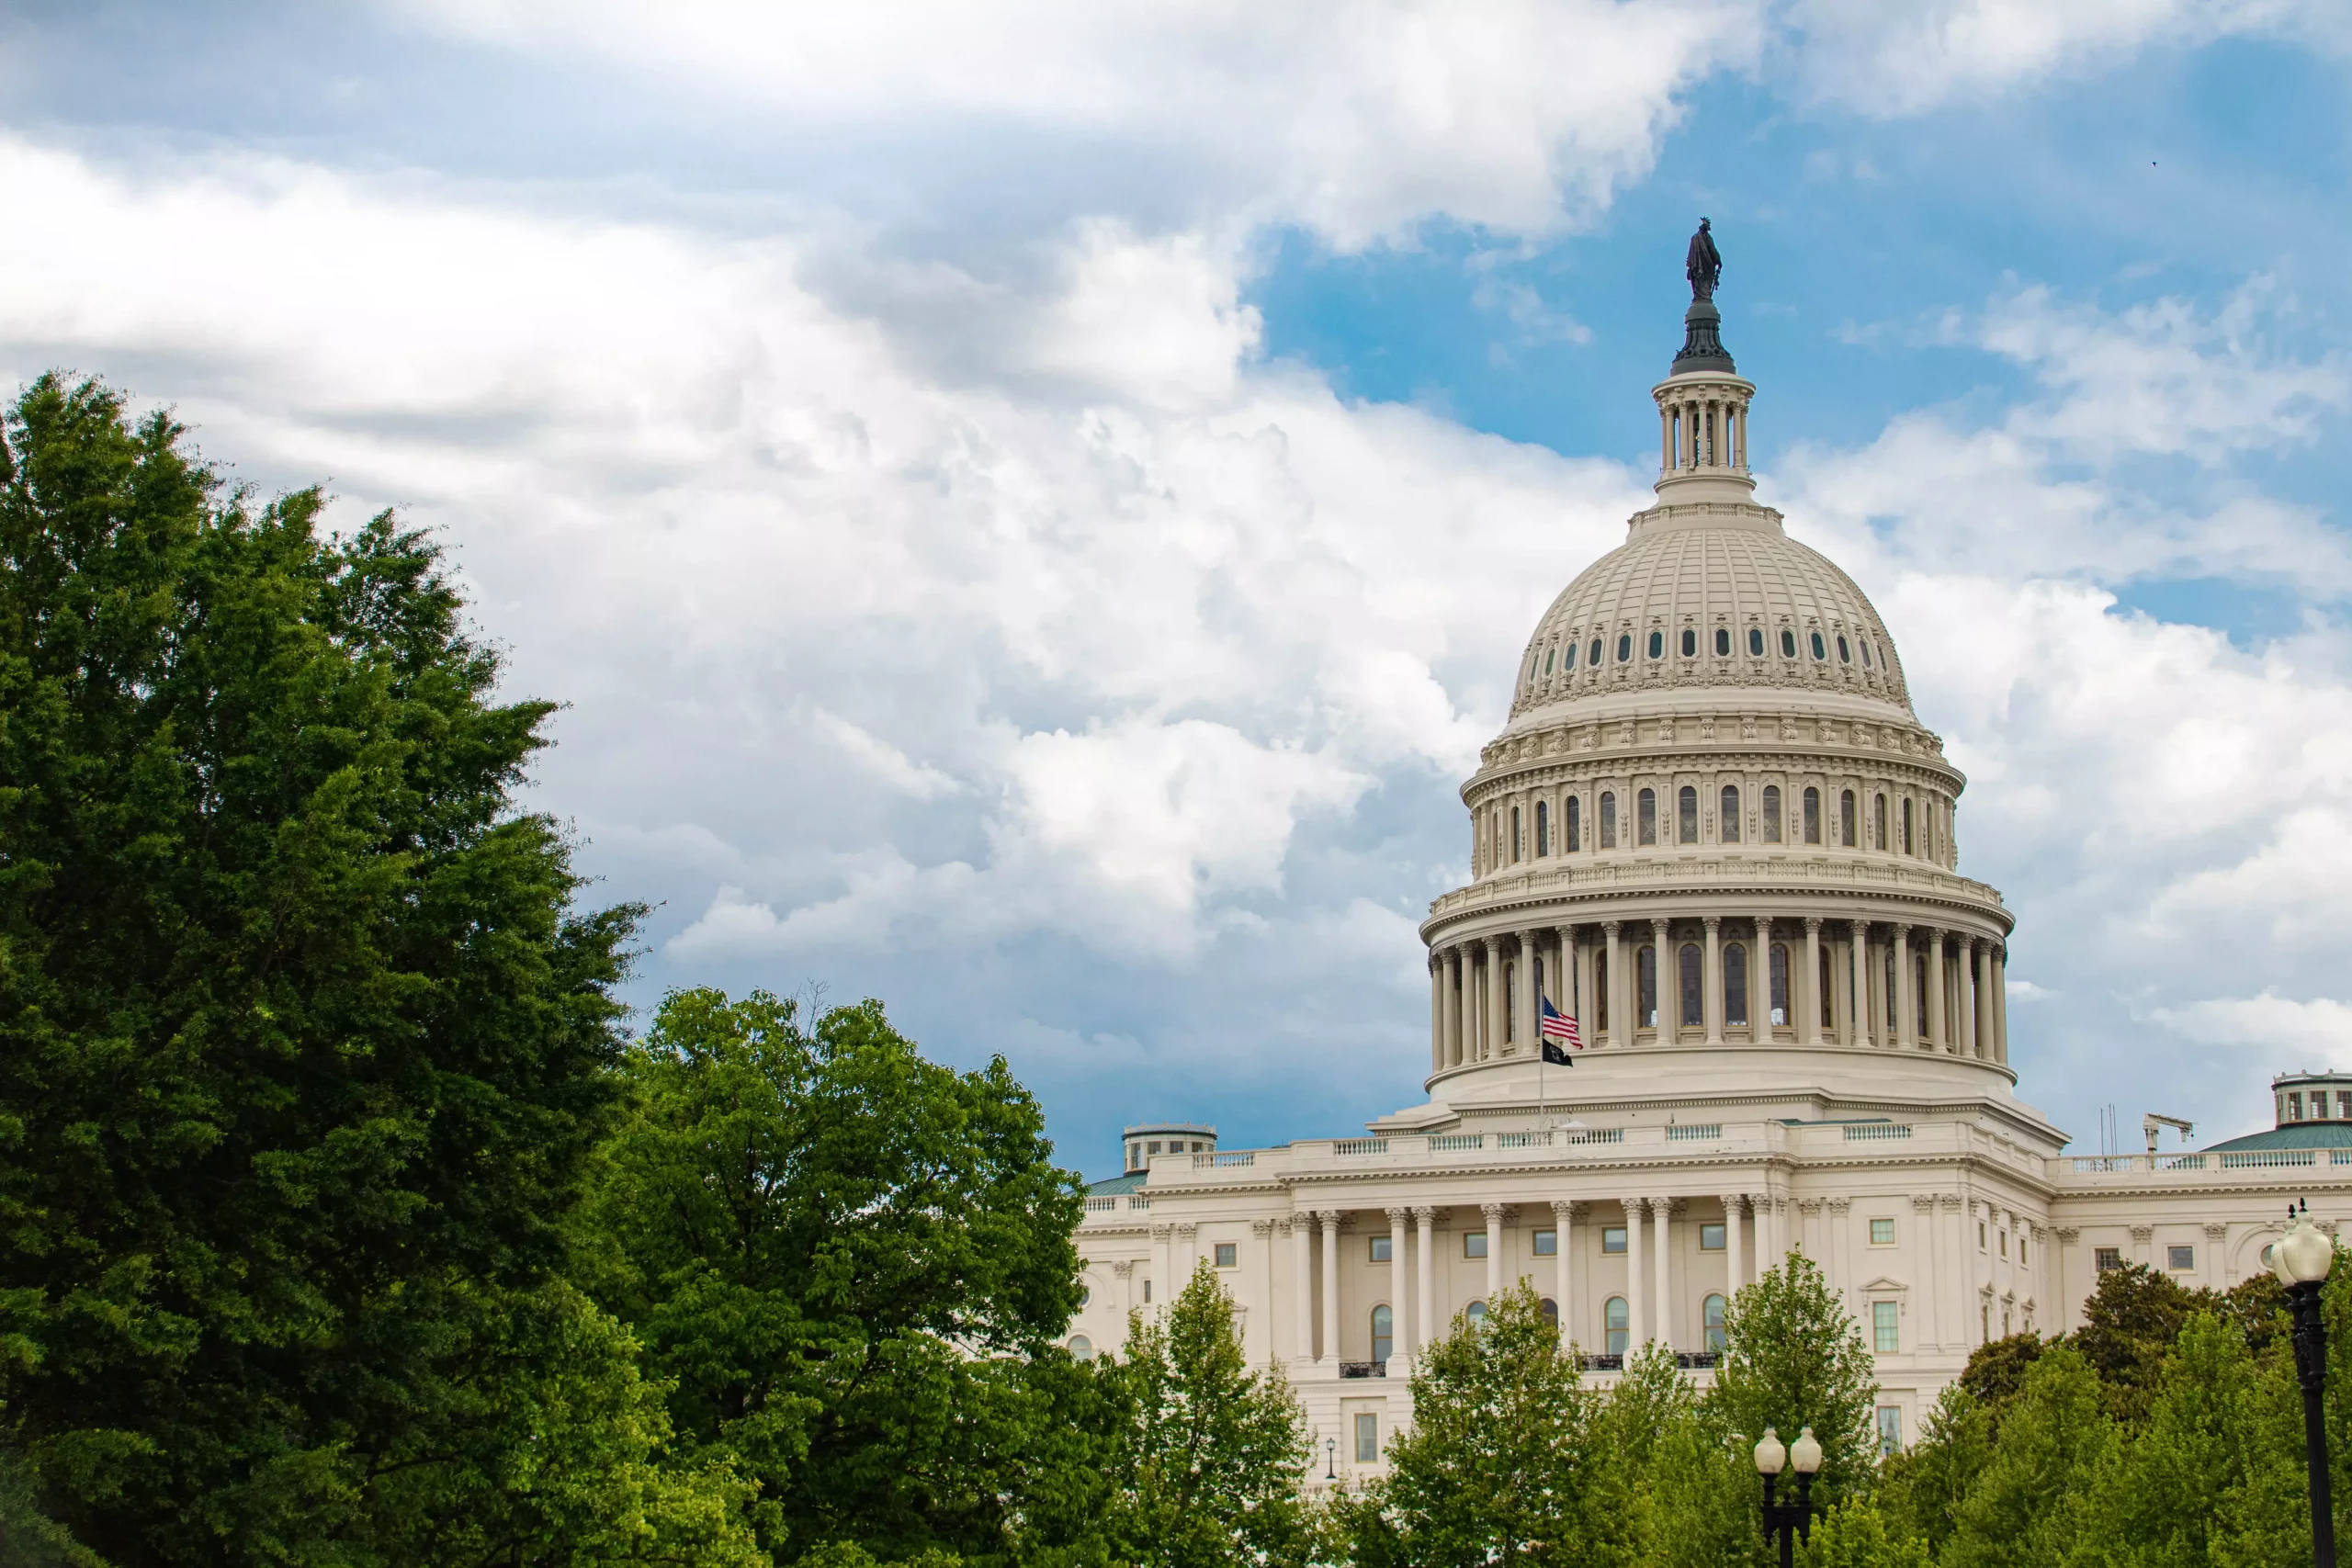 Fall 2022 Legislative Preview: What Issues Will Congress Take Up?